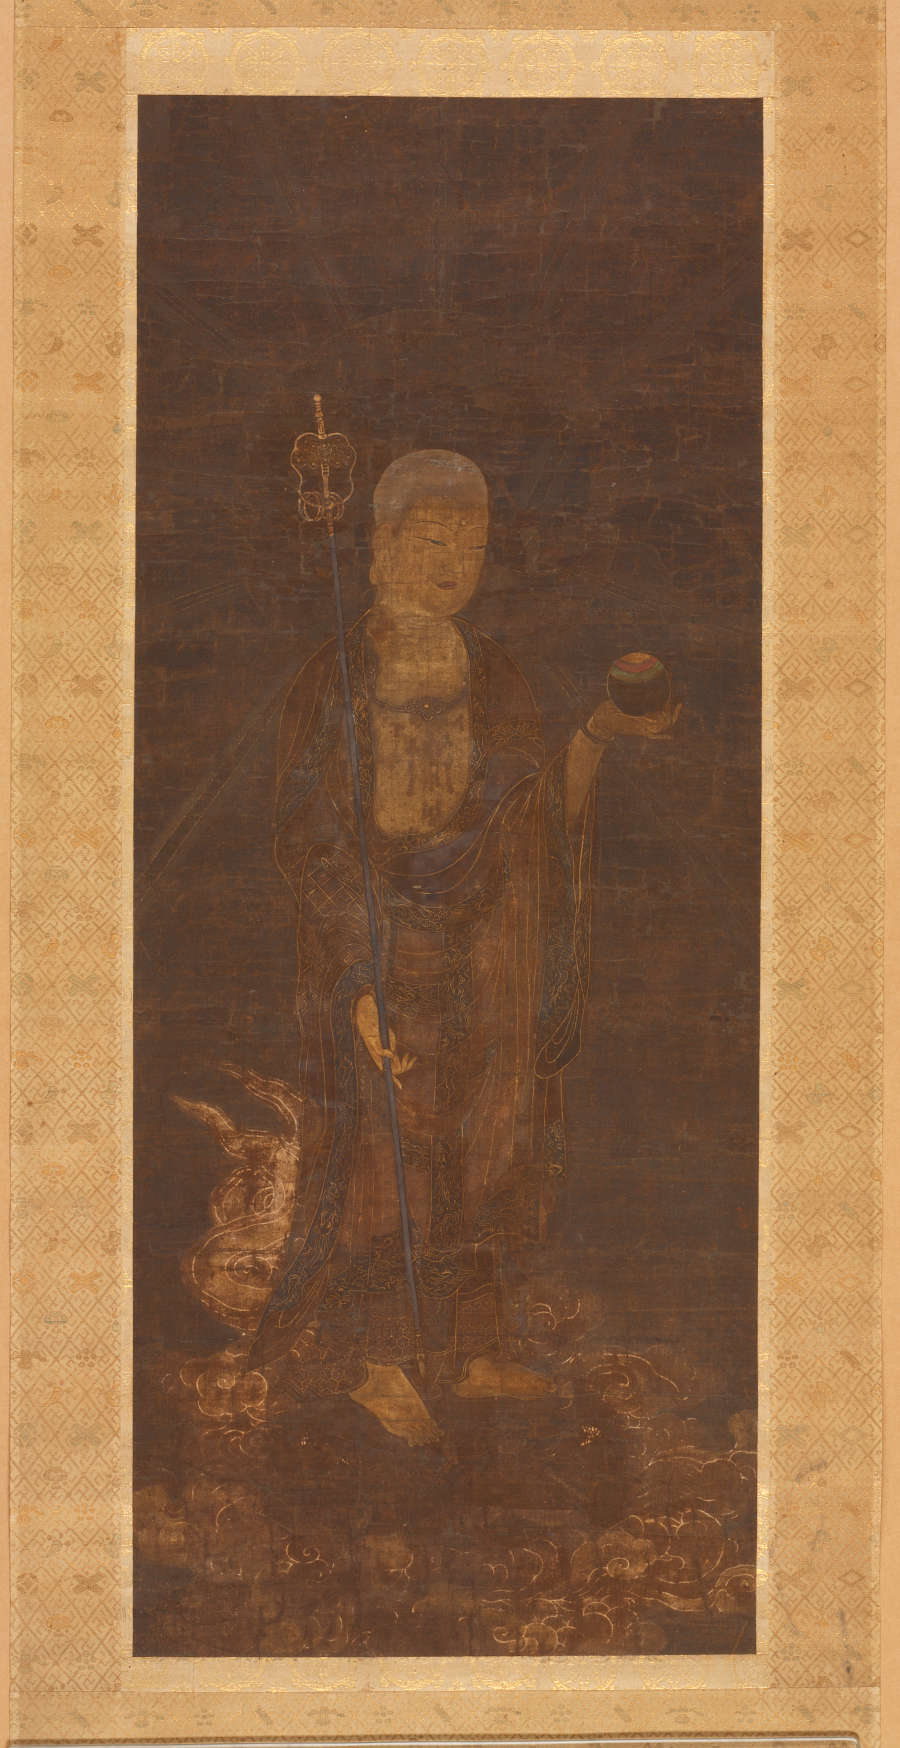 An ink painting in slight color and gold of the bodhisattva Jizō descending on clouds. Jizō carries a round wish-granting jewel in one hand and a staff in the other. 